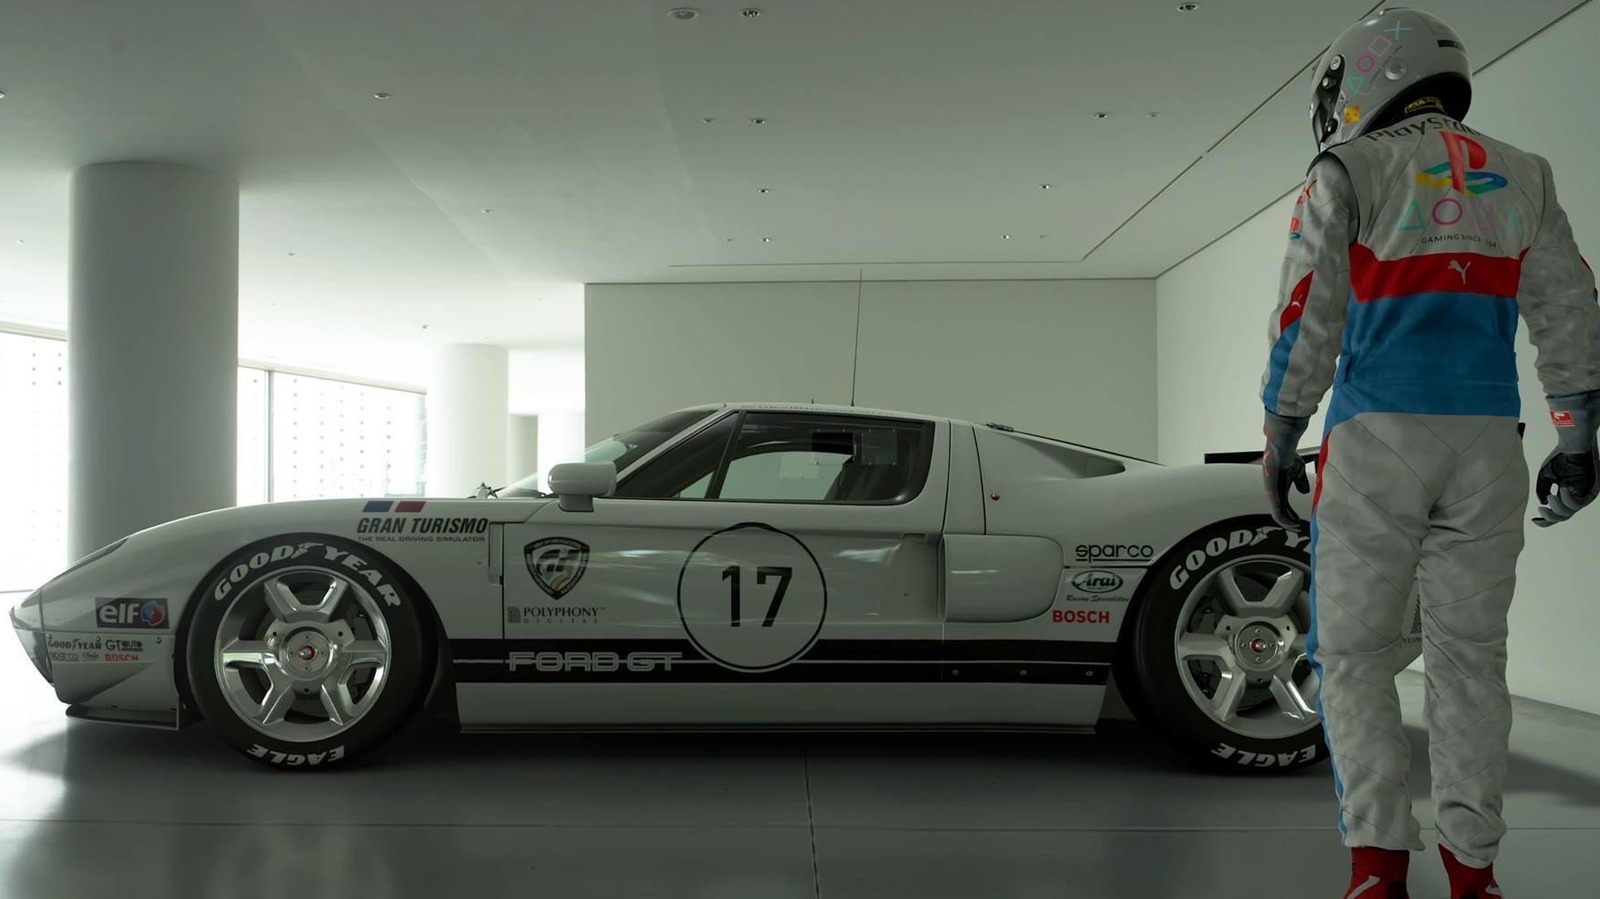 Gran Turismo 4 codes discovered nearly 20 years later - Xfire